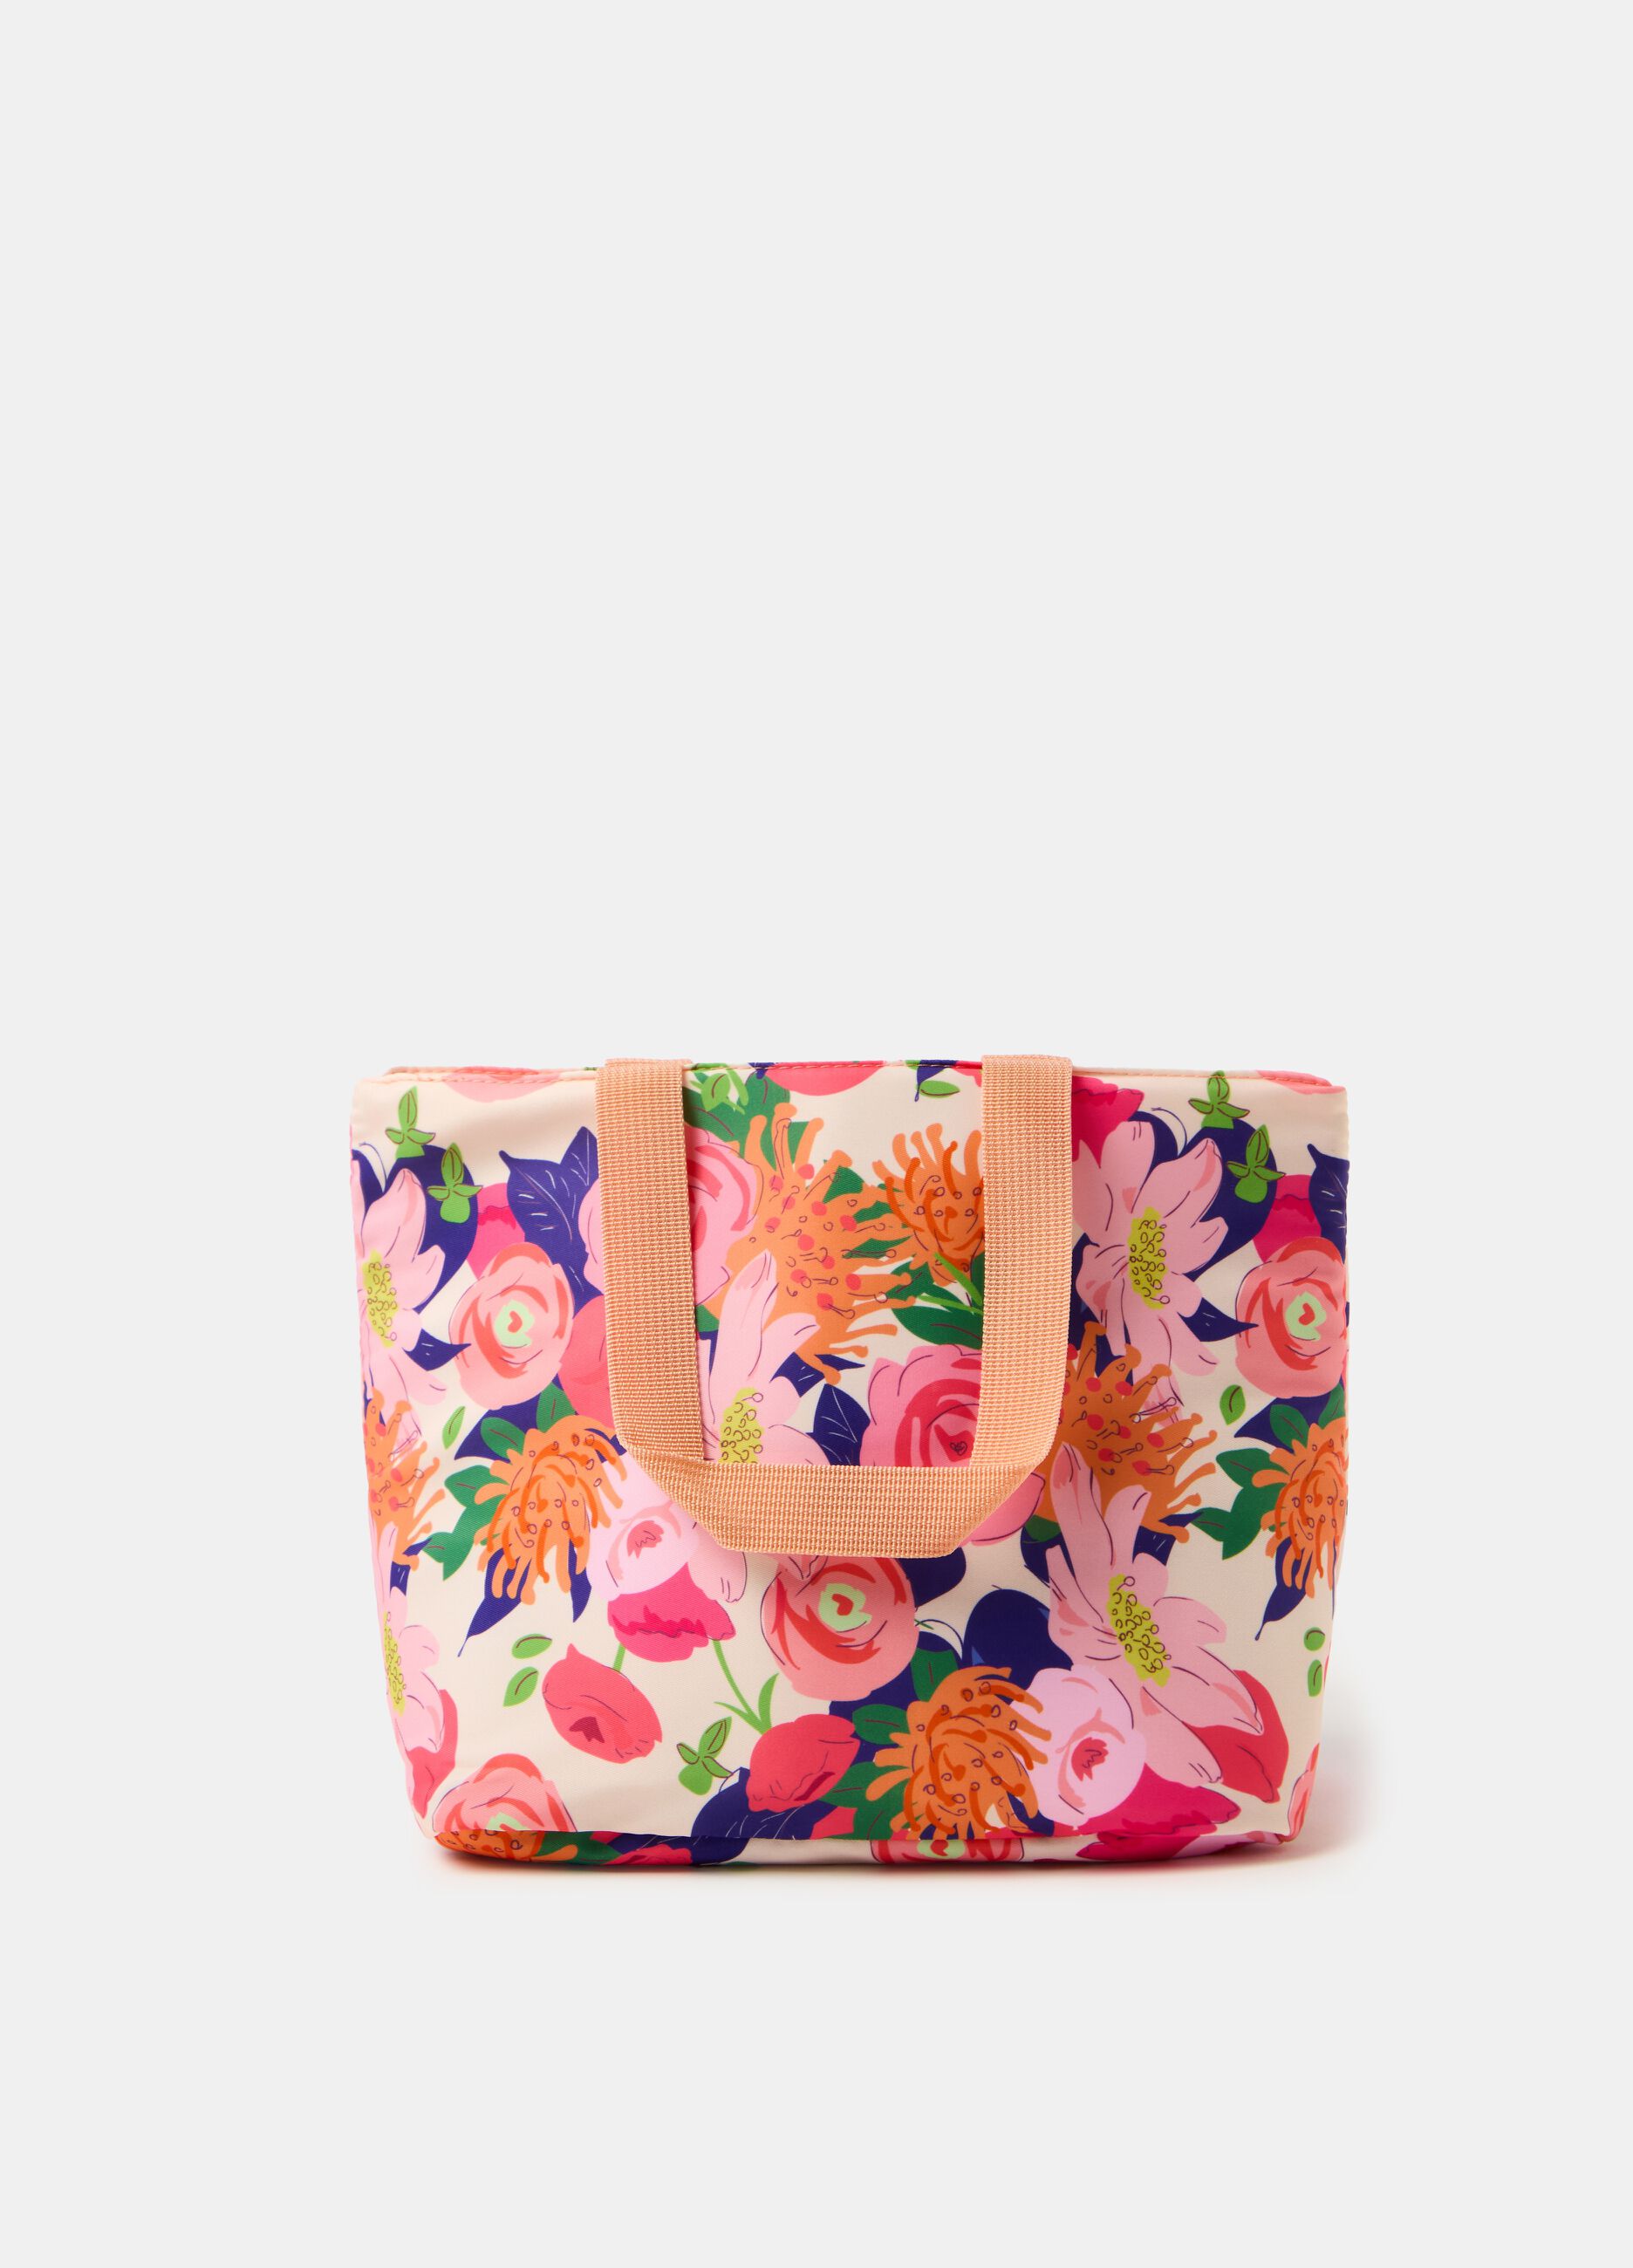 Floral lunch tote bag